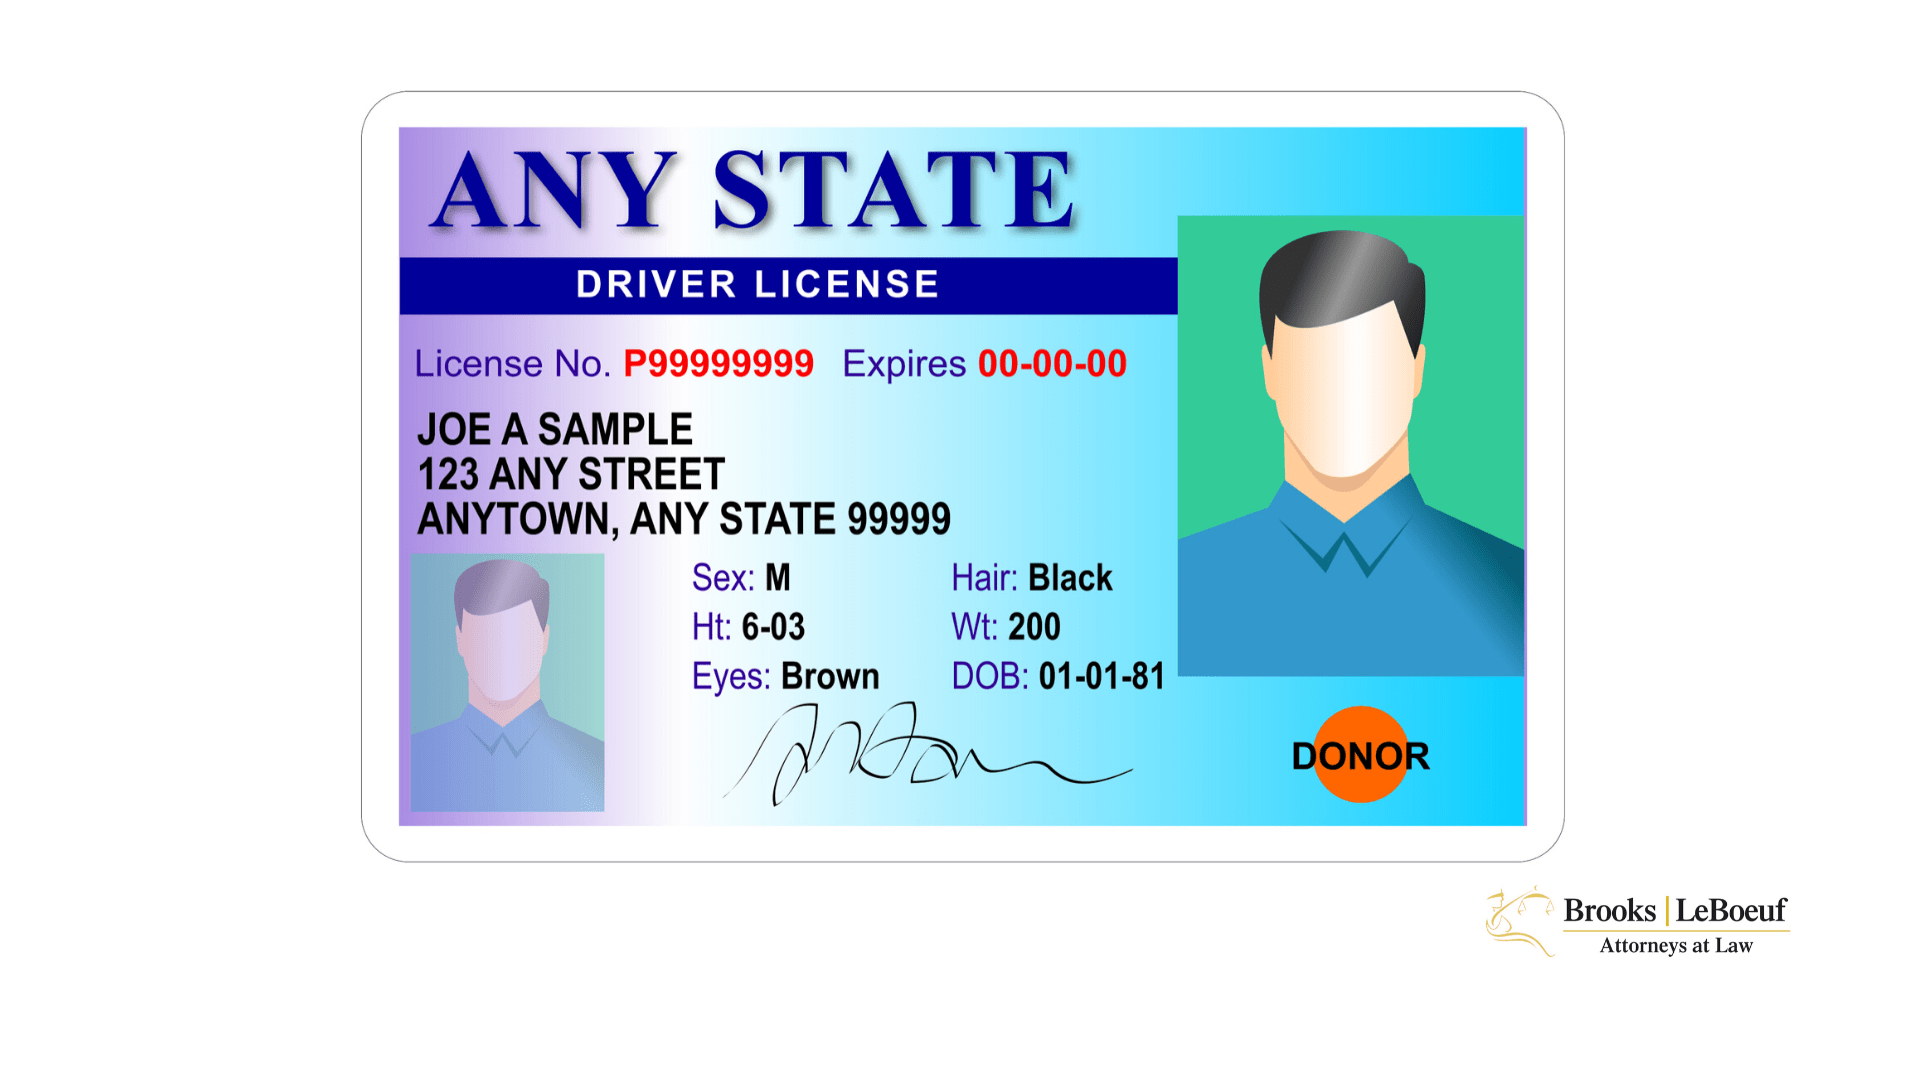 Are Fake IDs a Big Deal in Florida?